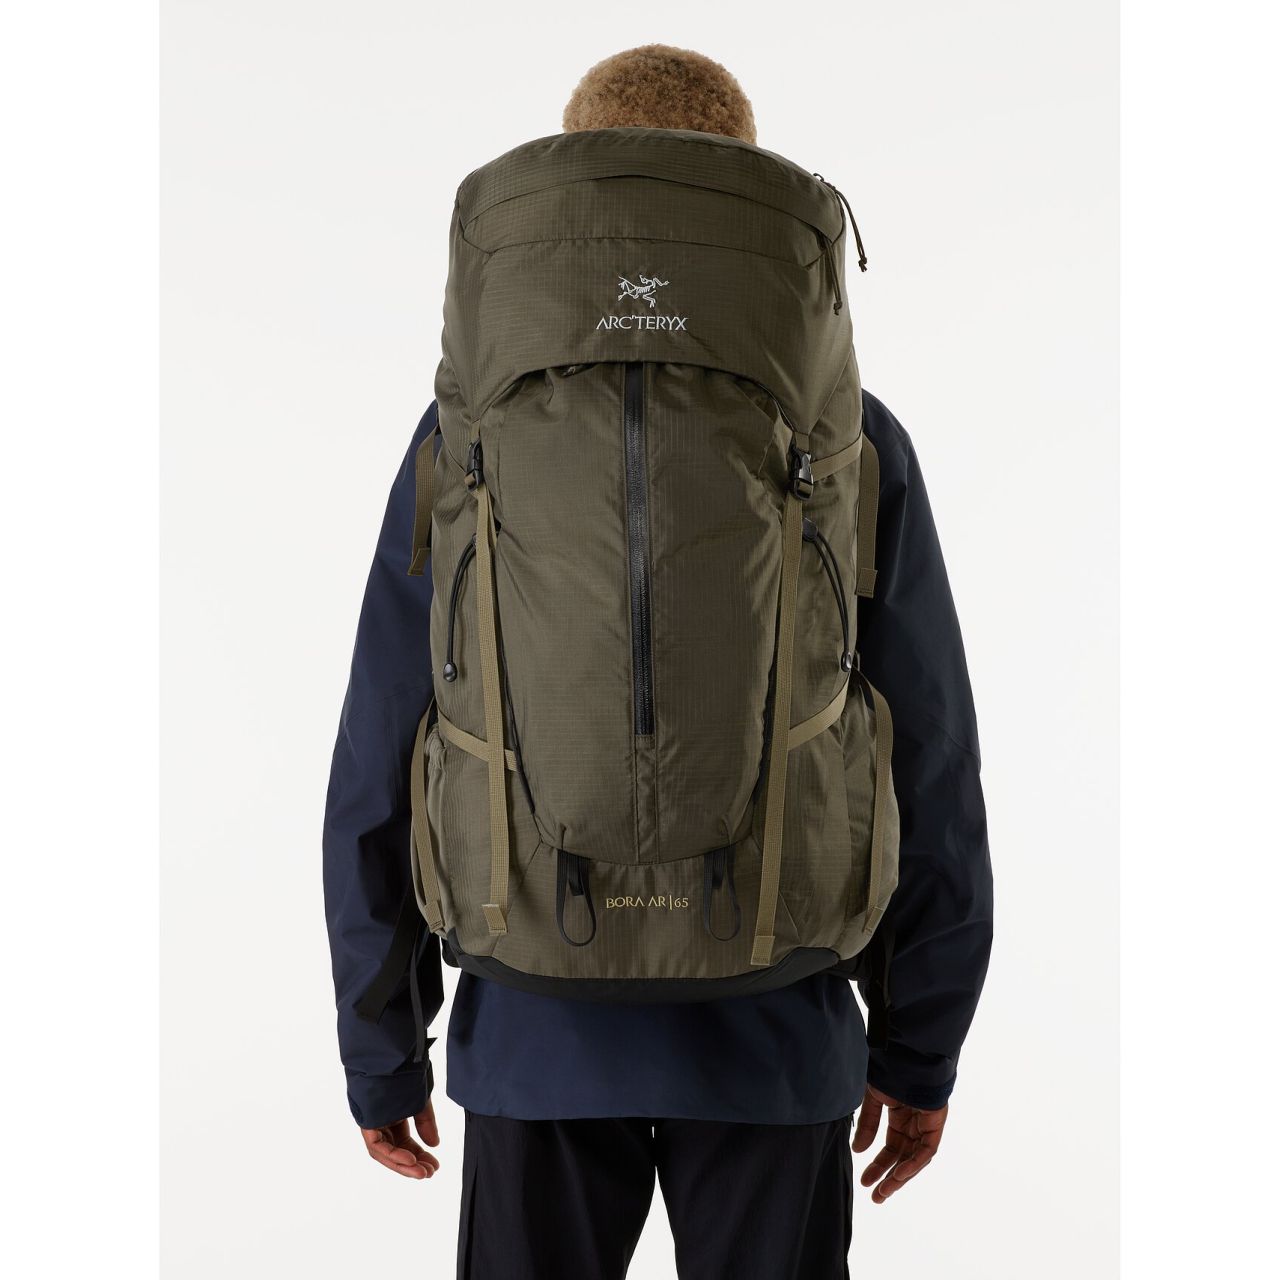 This Waterproof Arc'teryx Backpack Is $85 Off Today